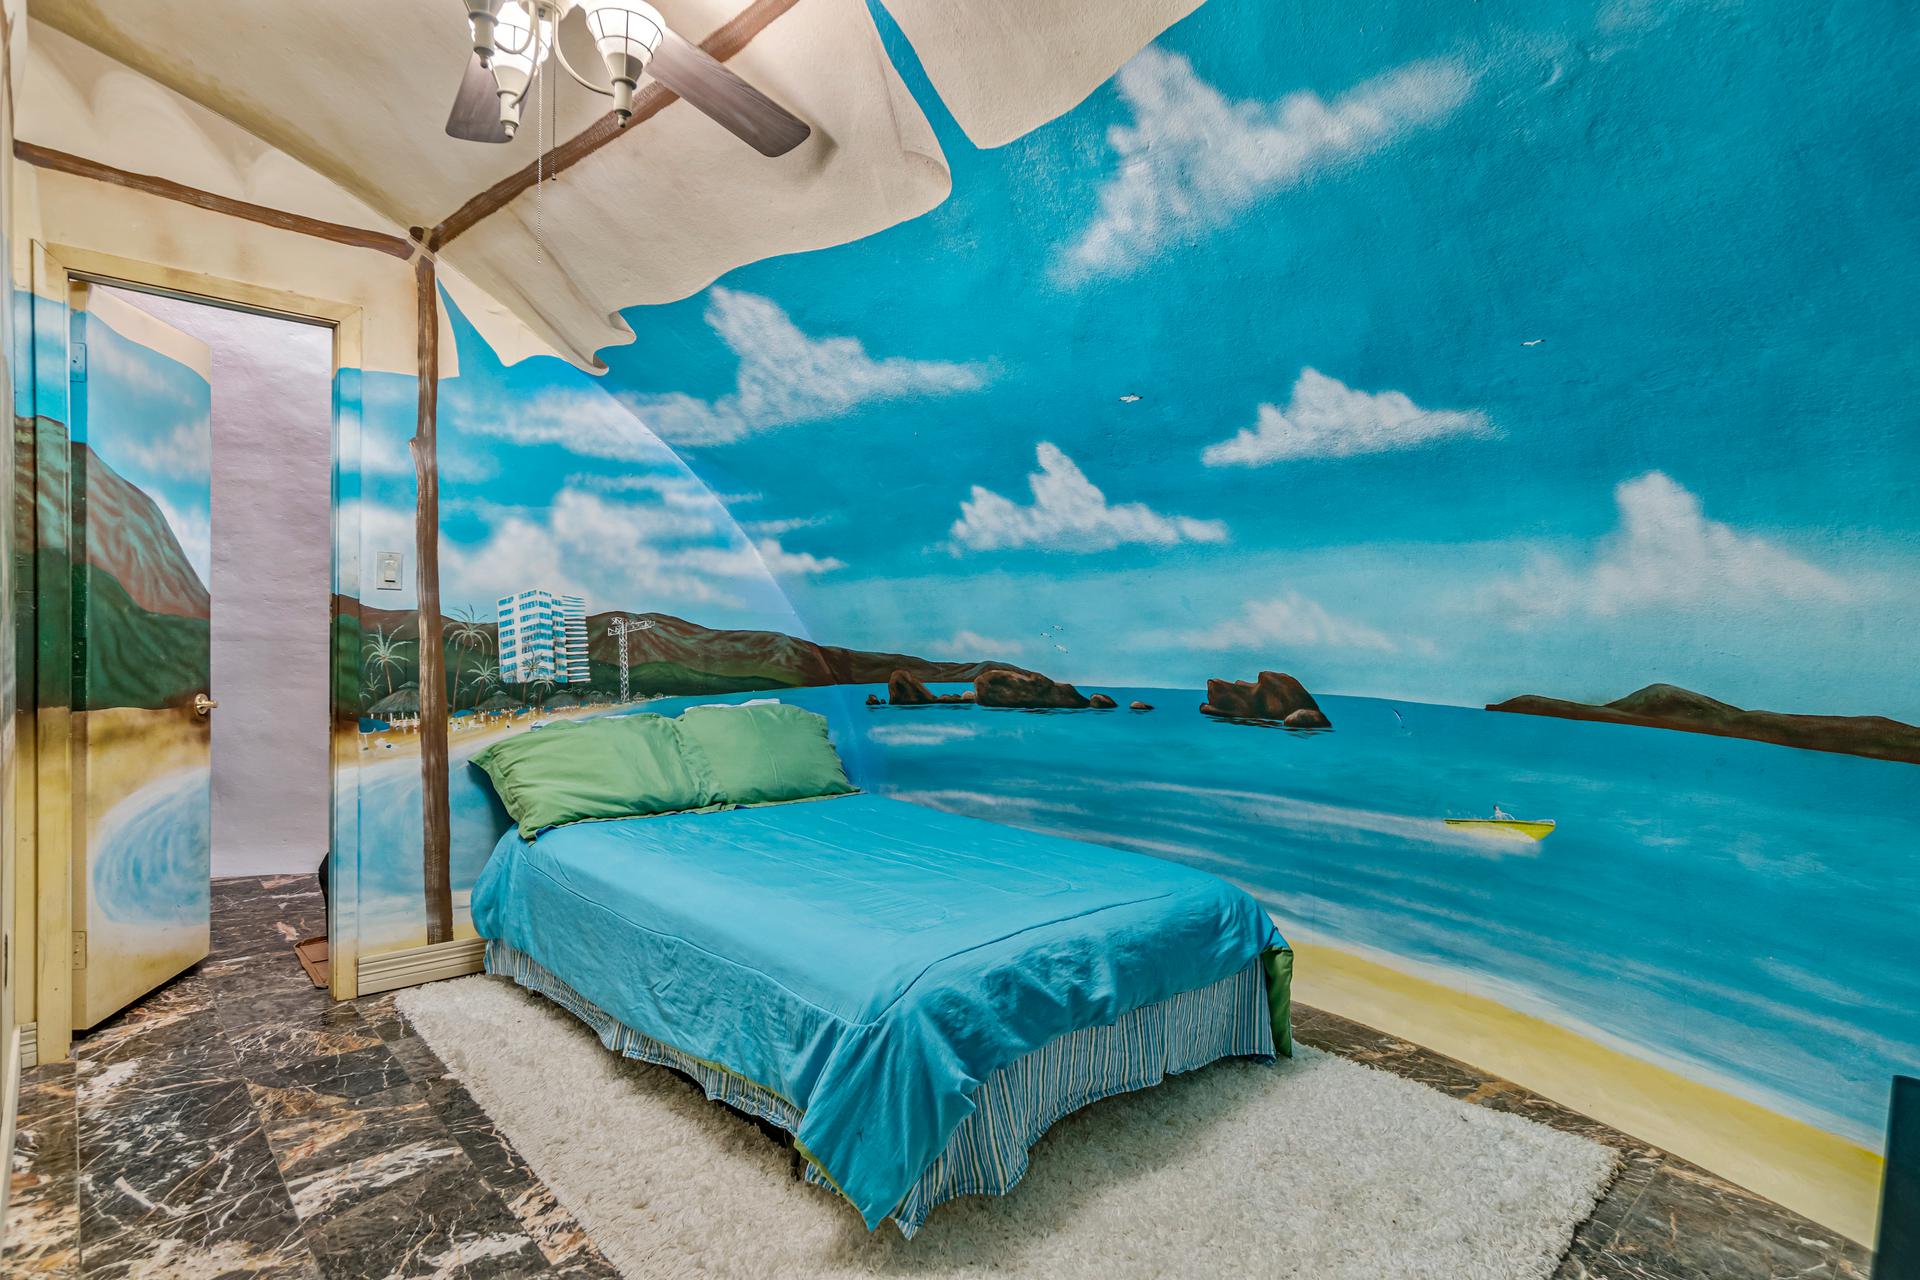 The second bedroom is painted to feel like a tropical cabana.